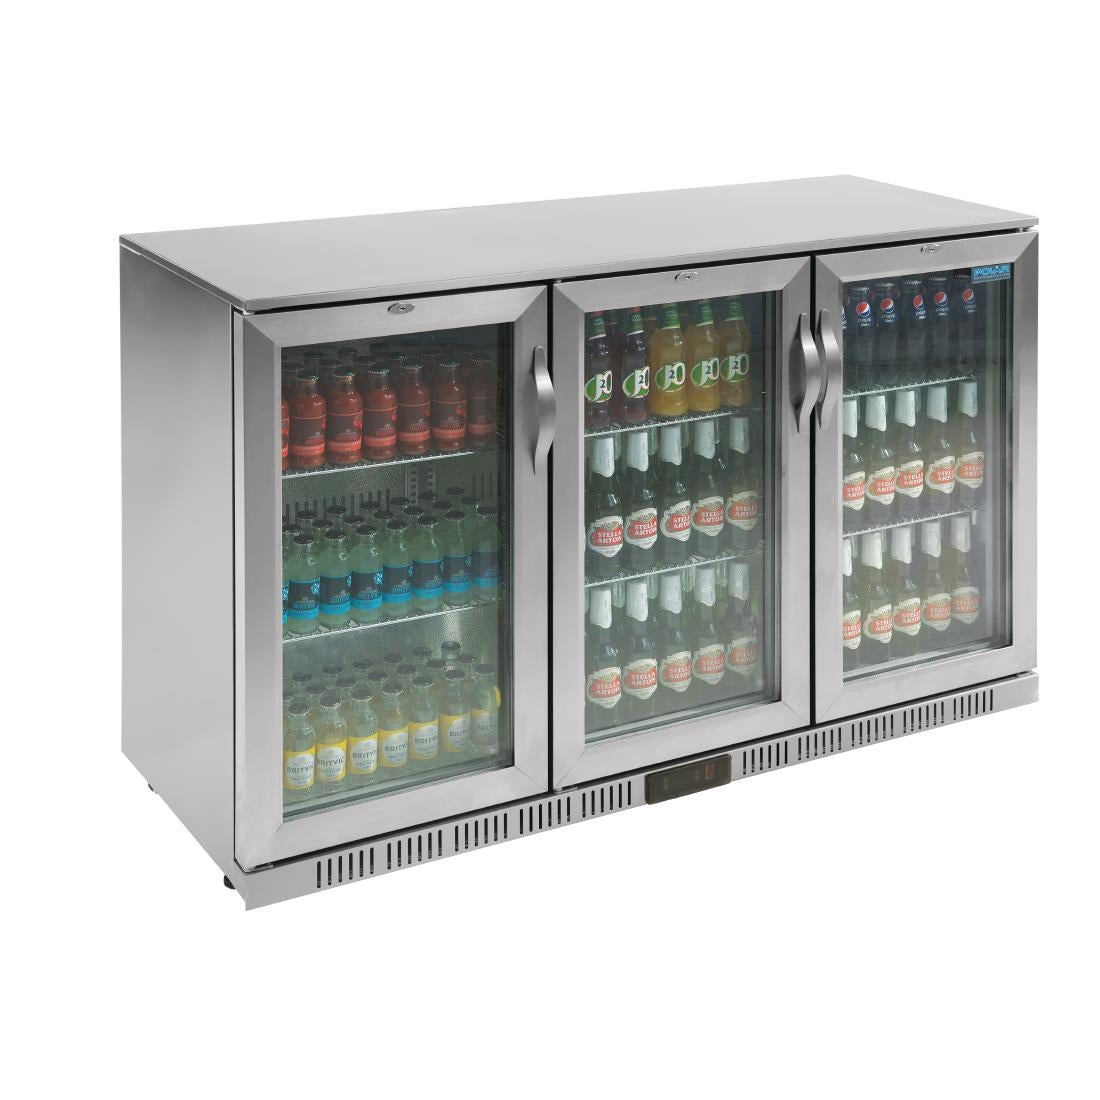 Polar GL009 Back Bar Cooler with Hinged Doors Stainless Steel 330Ltr.Product Ref:00584.Model: GL009. 🚚 1-3 Days Delivery